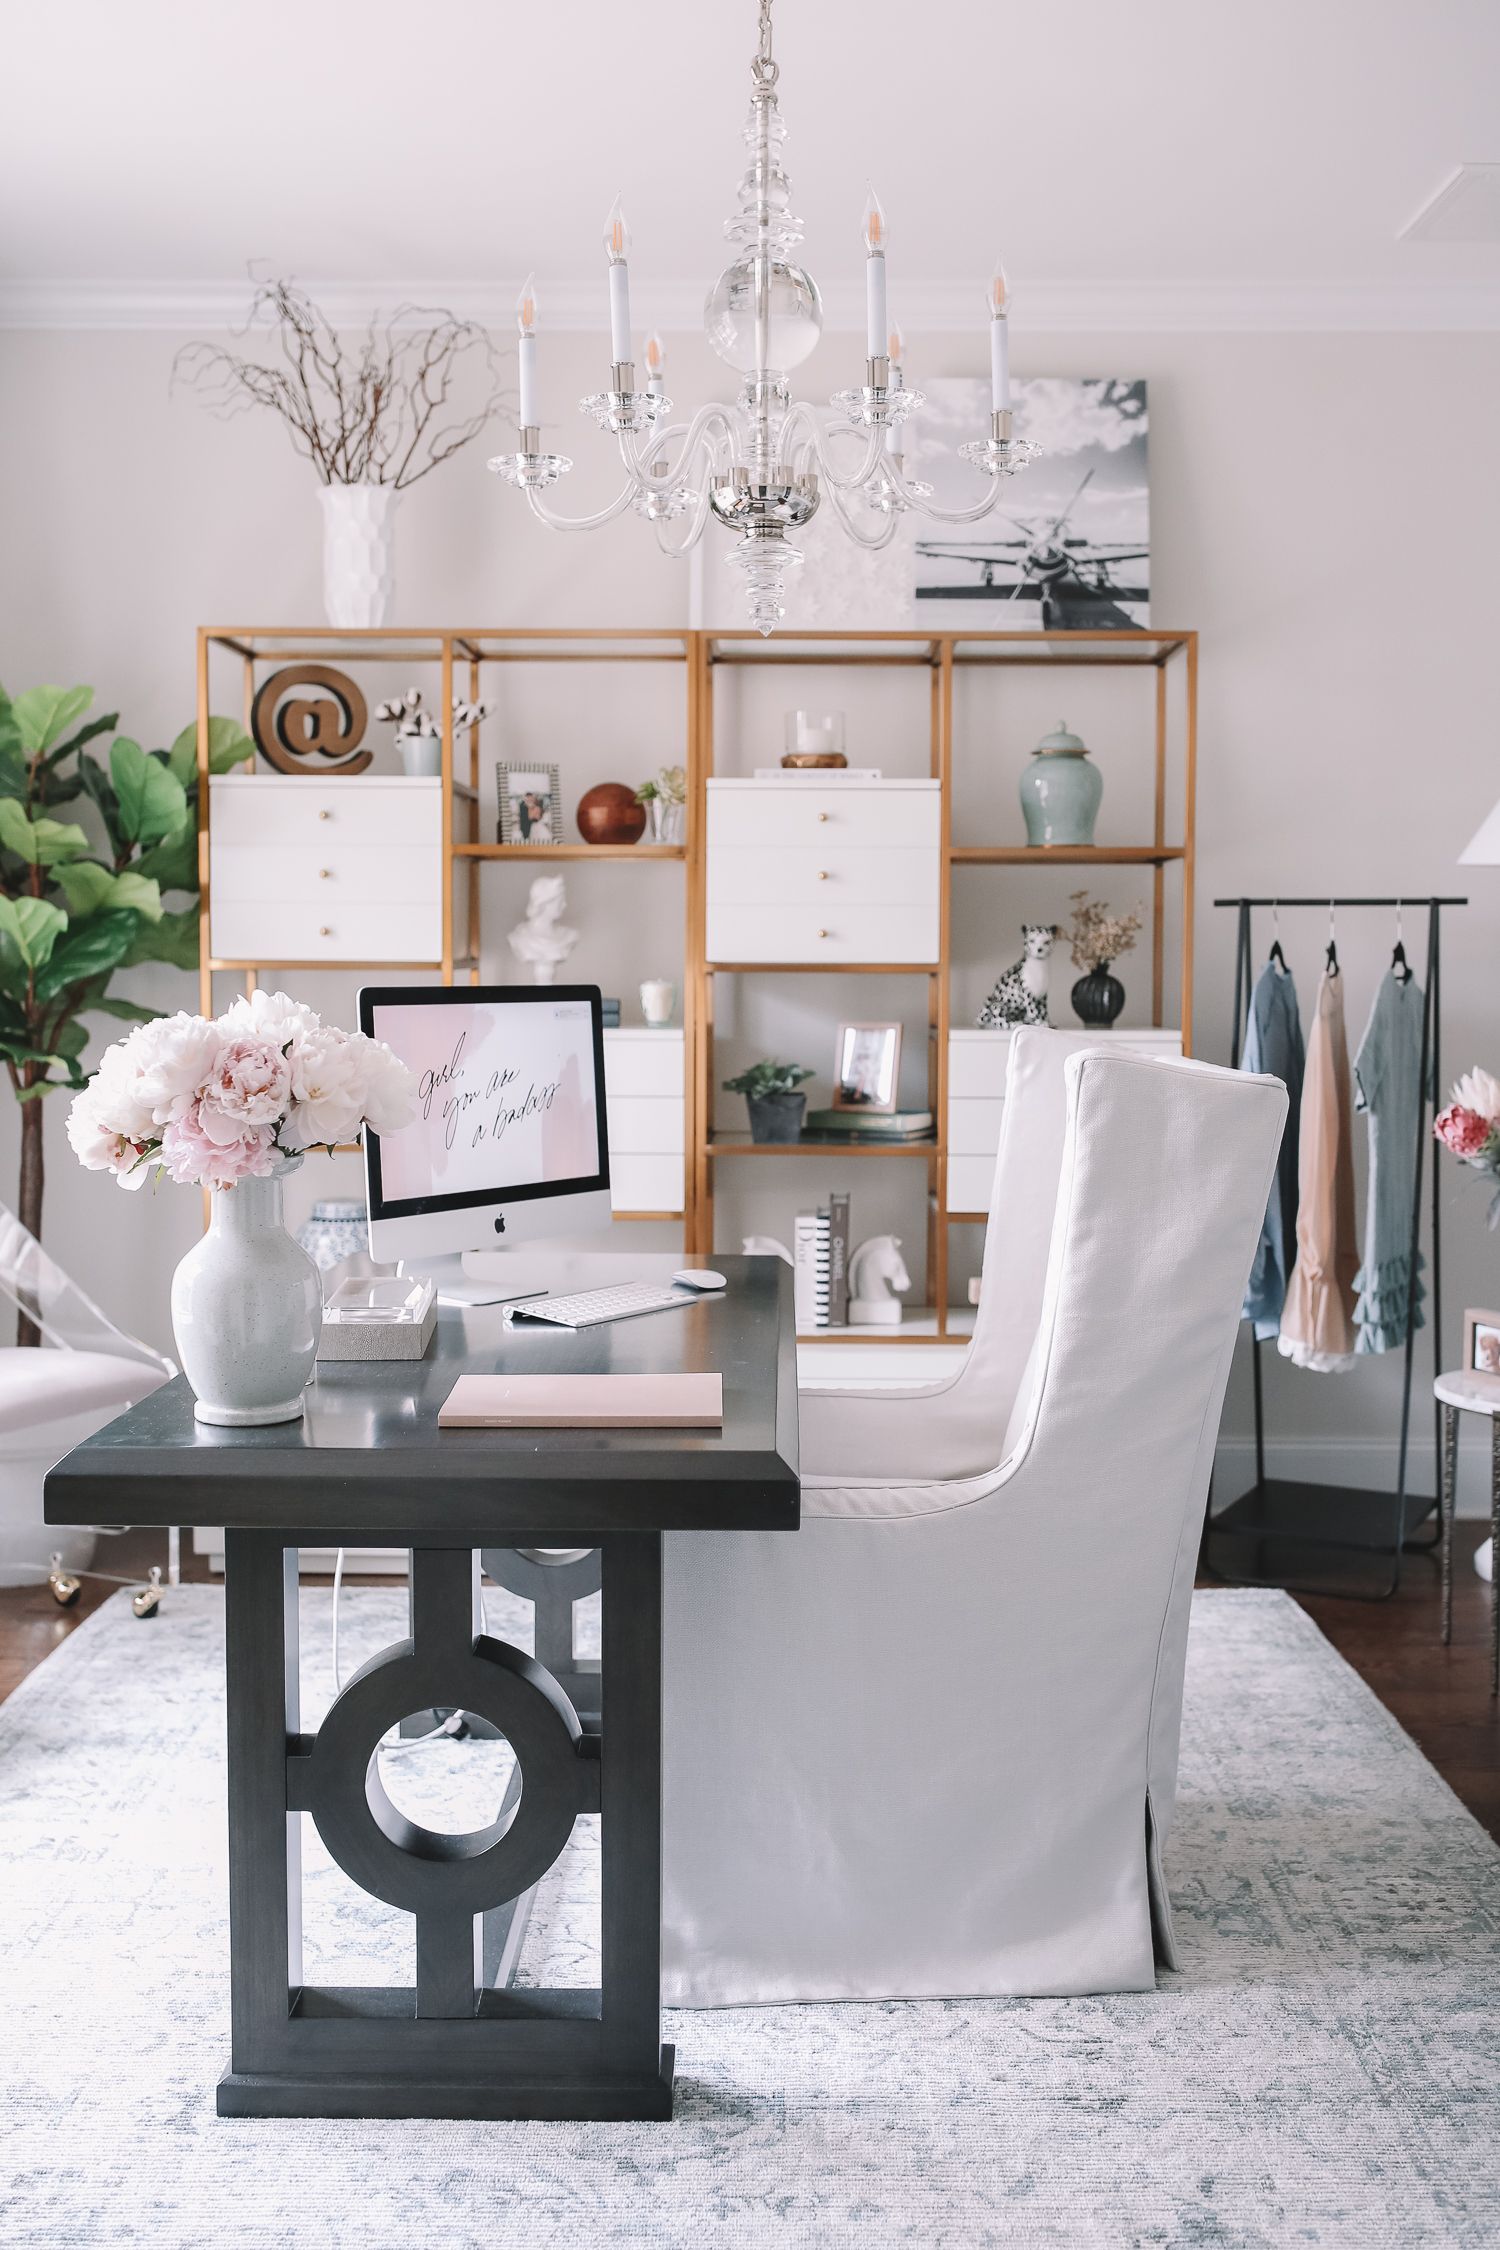 10 Simple Ideas to Decorate the Office at Work With Items From Home